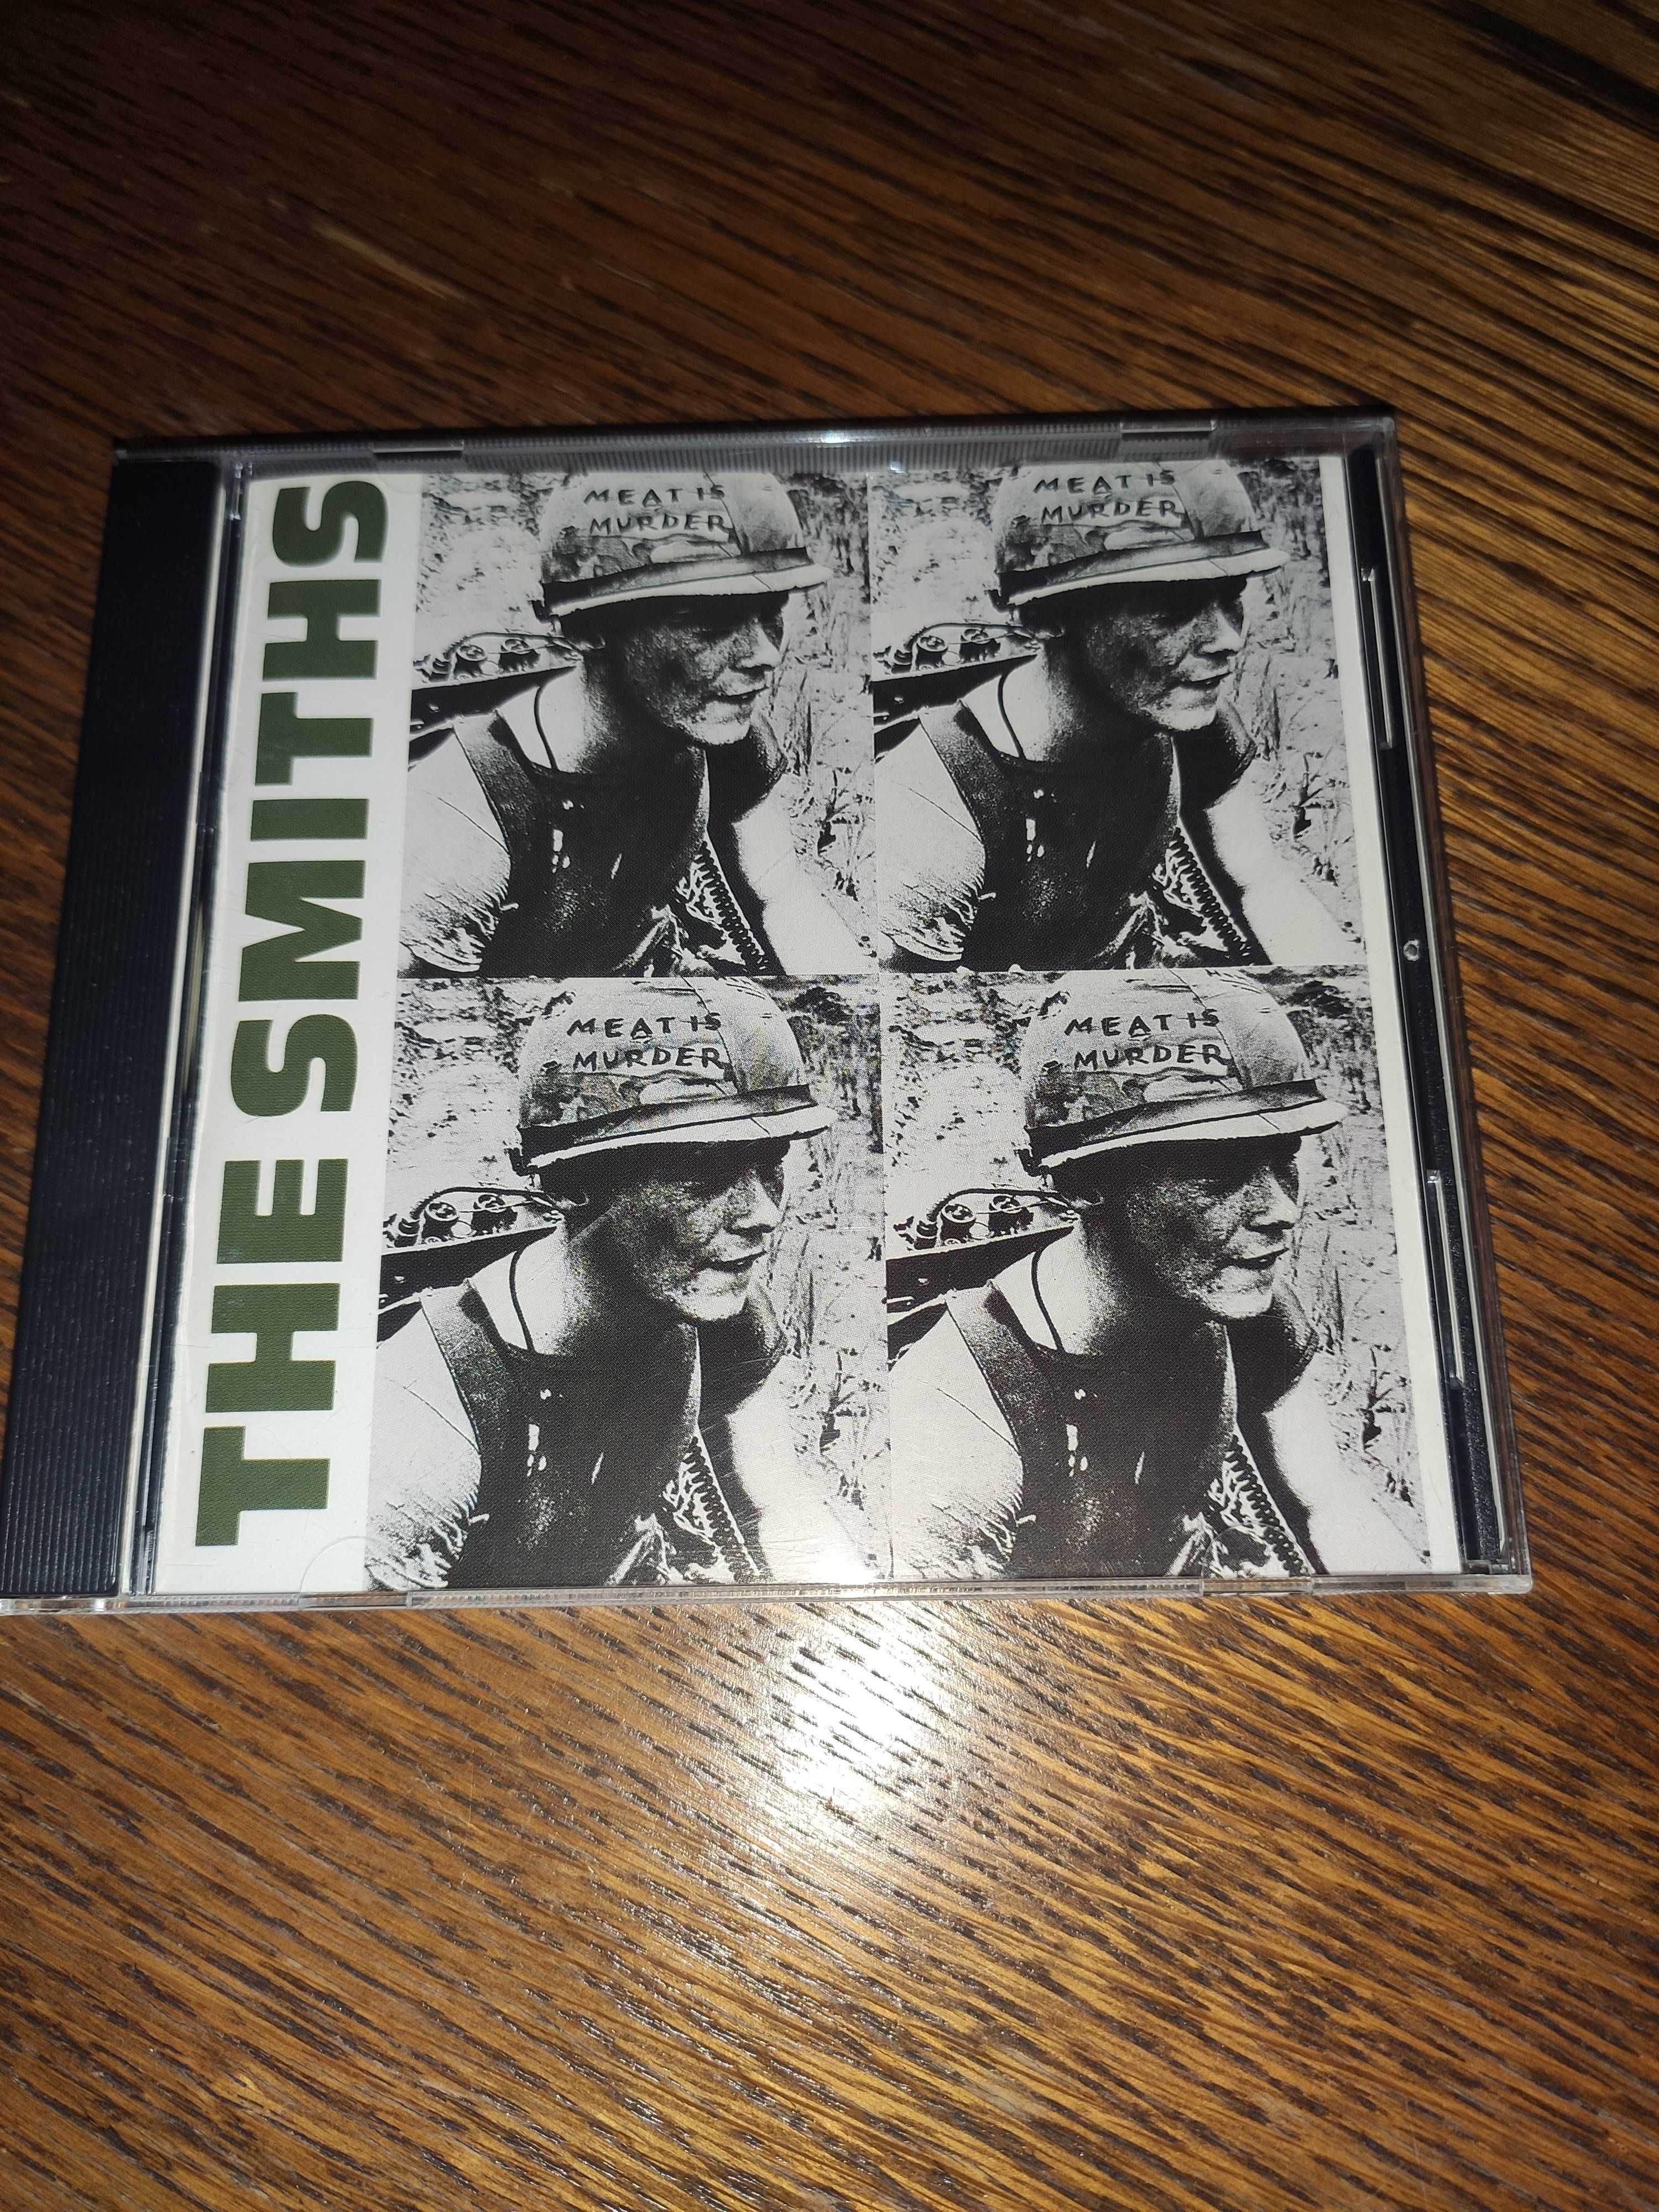 The Smiths - Meat is murder, CD 1990, USA, Marr, Morrissey